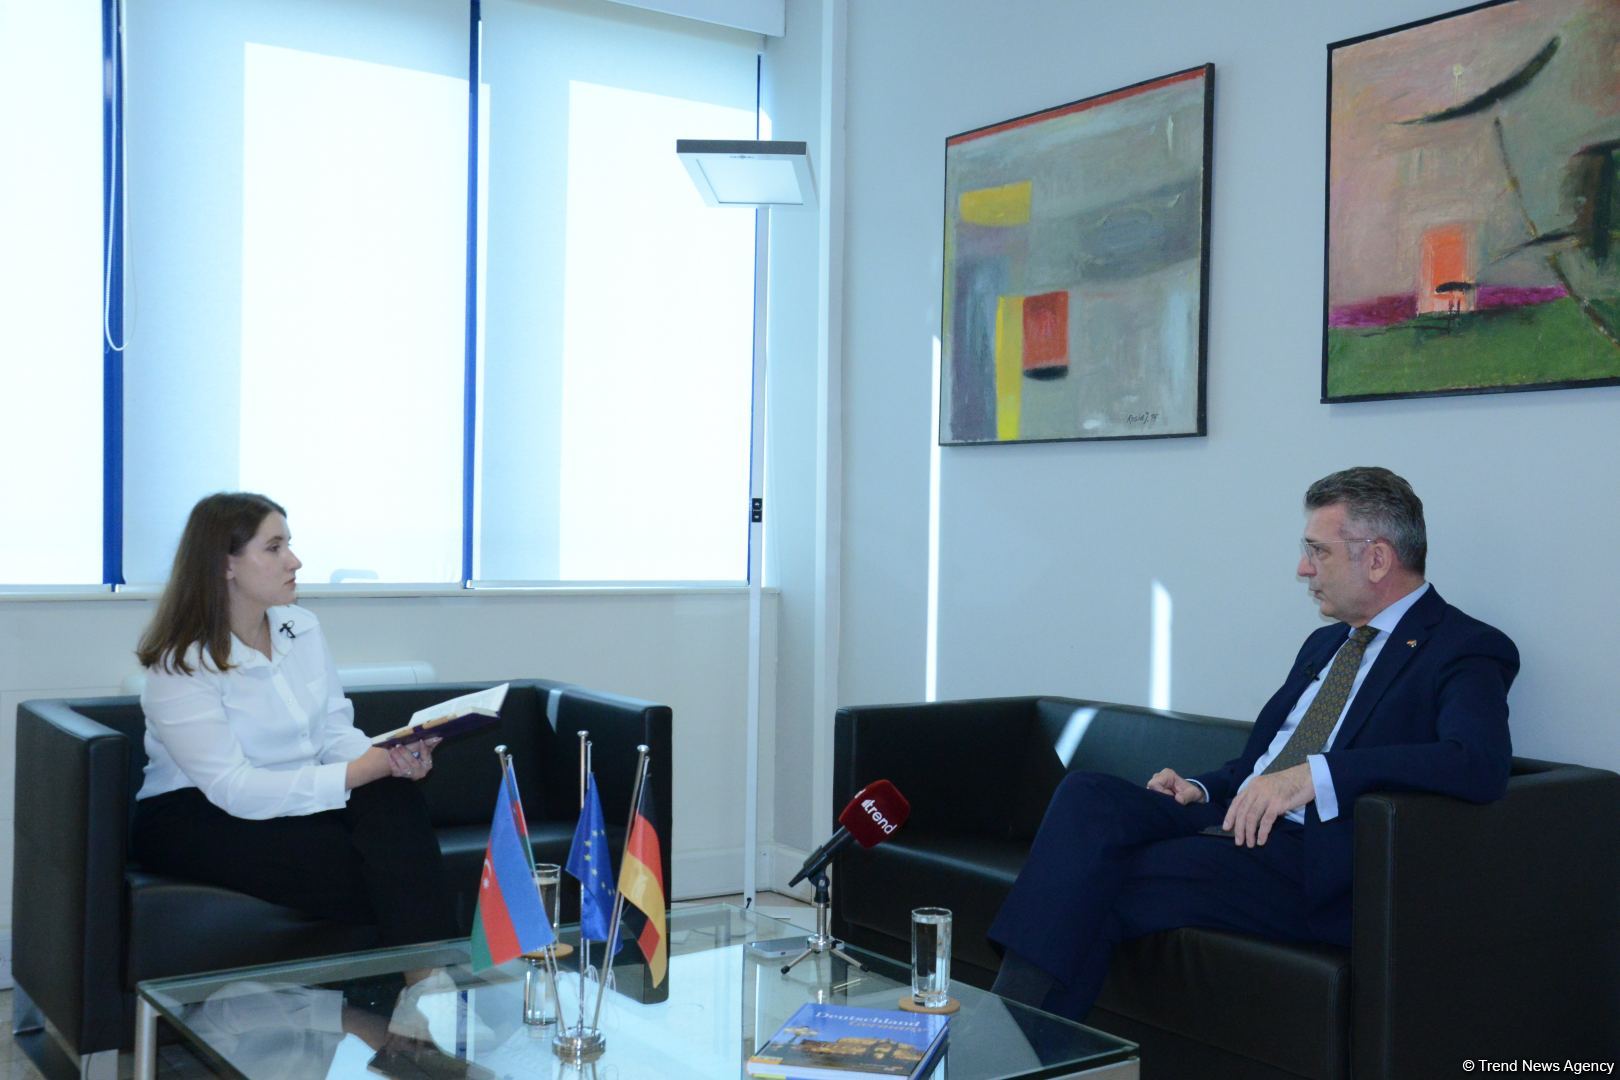 Germany looks forward to continue developing dynamic relations with Azerbaijan - Ambassador Horlemann (Interview) (PHOTO/VIDEO)